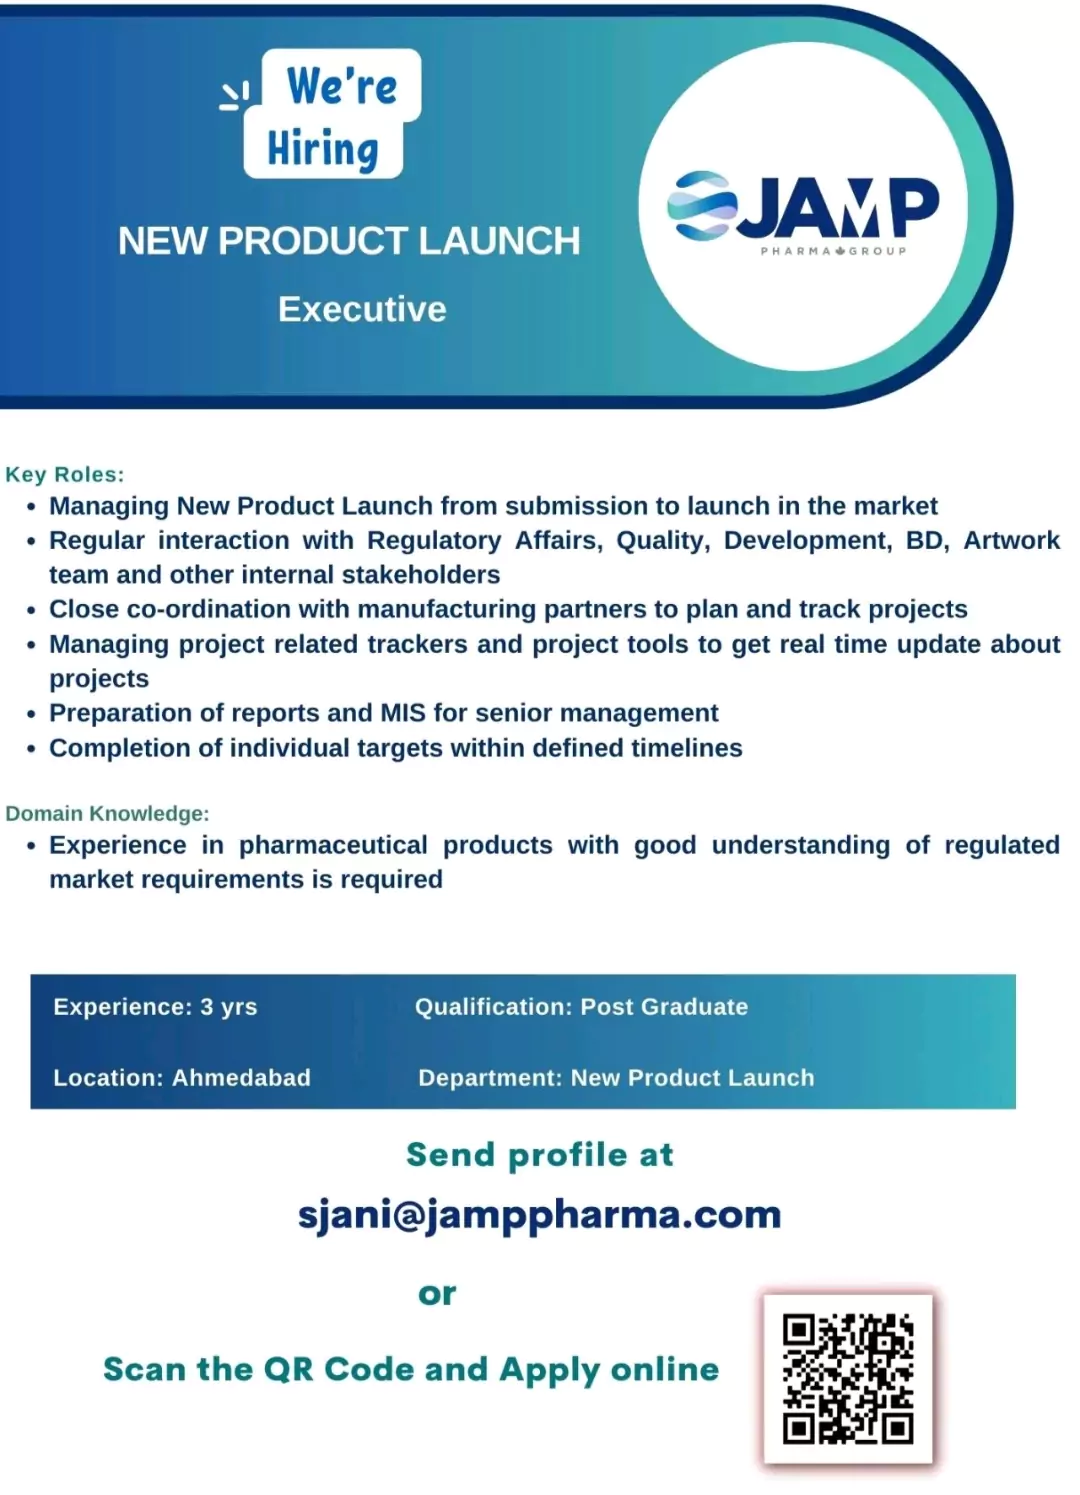 Jamp pharmaceuticals Hiring for Executive position @ Ahmedabad